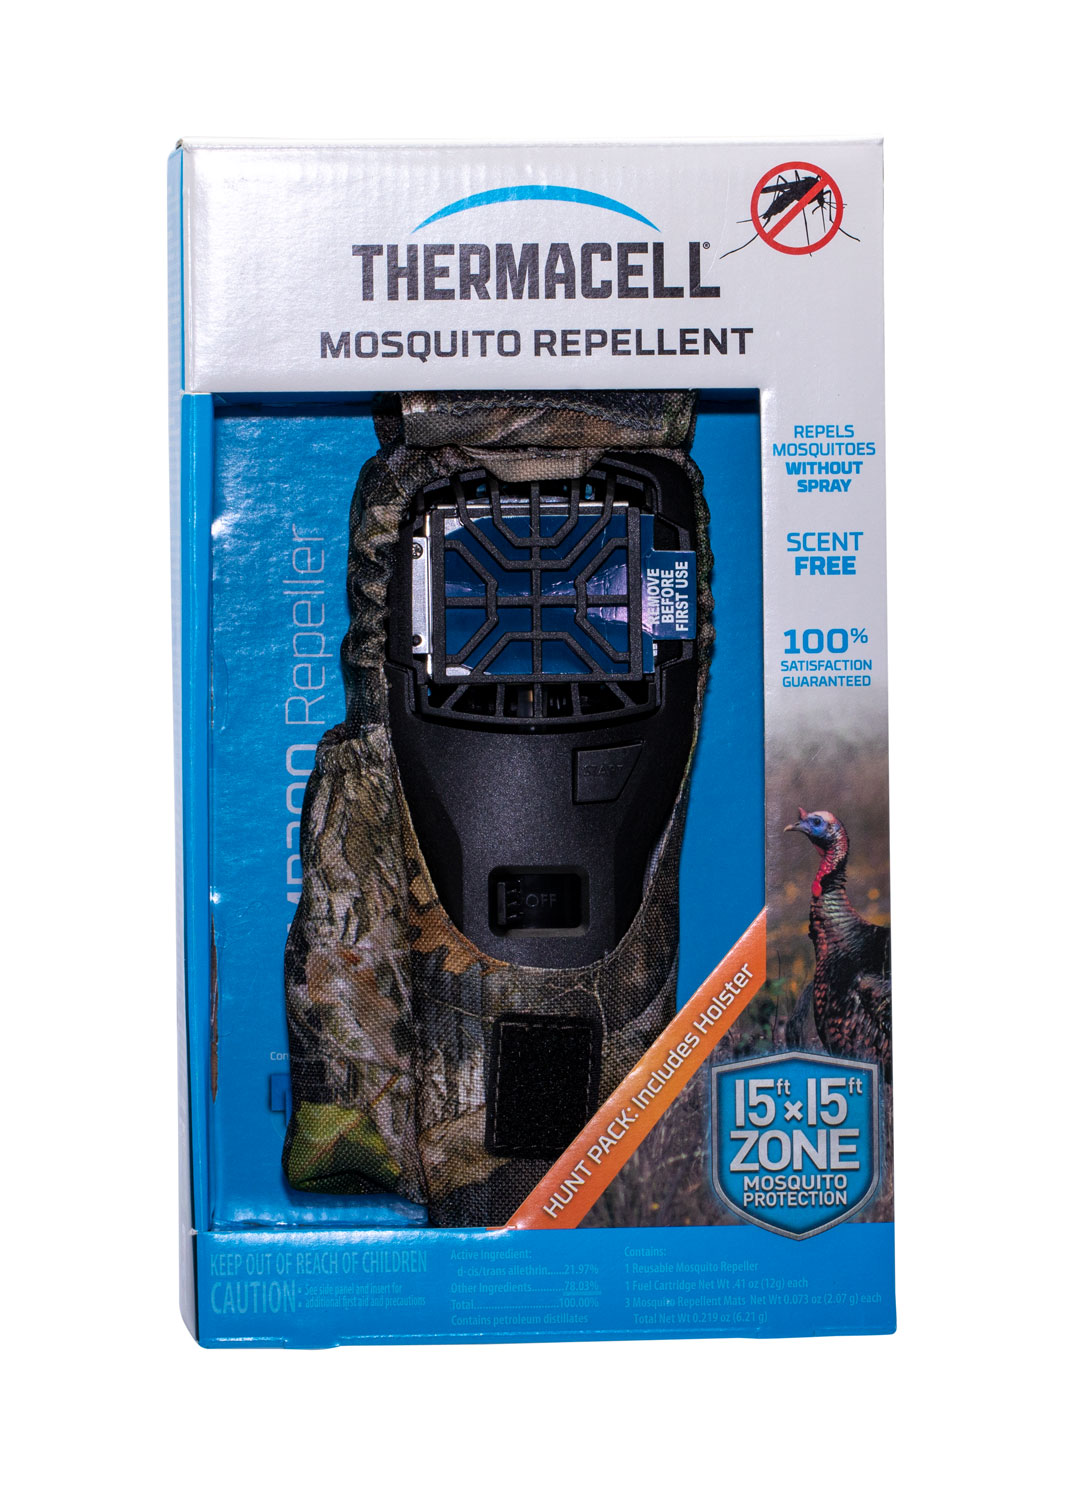 Thermacell MR300F MR300 Portable Repeller Camo Effective 15 ft Odorless Scent Repels Mosquito Effective Up to 12 hrs